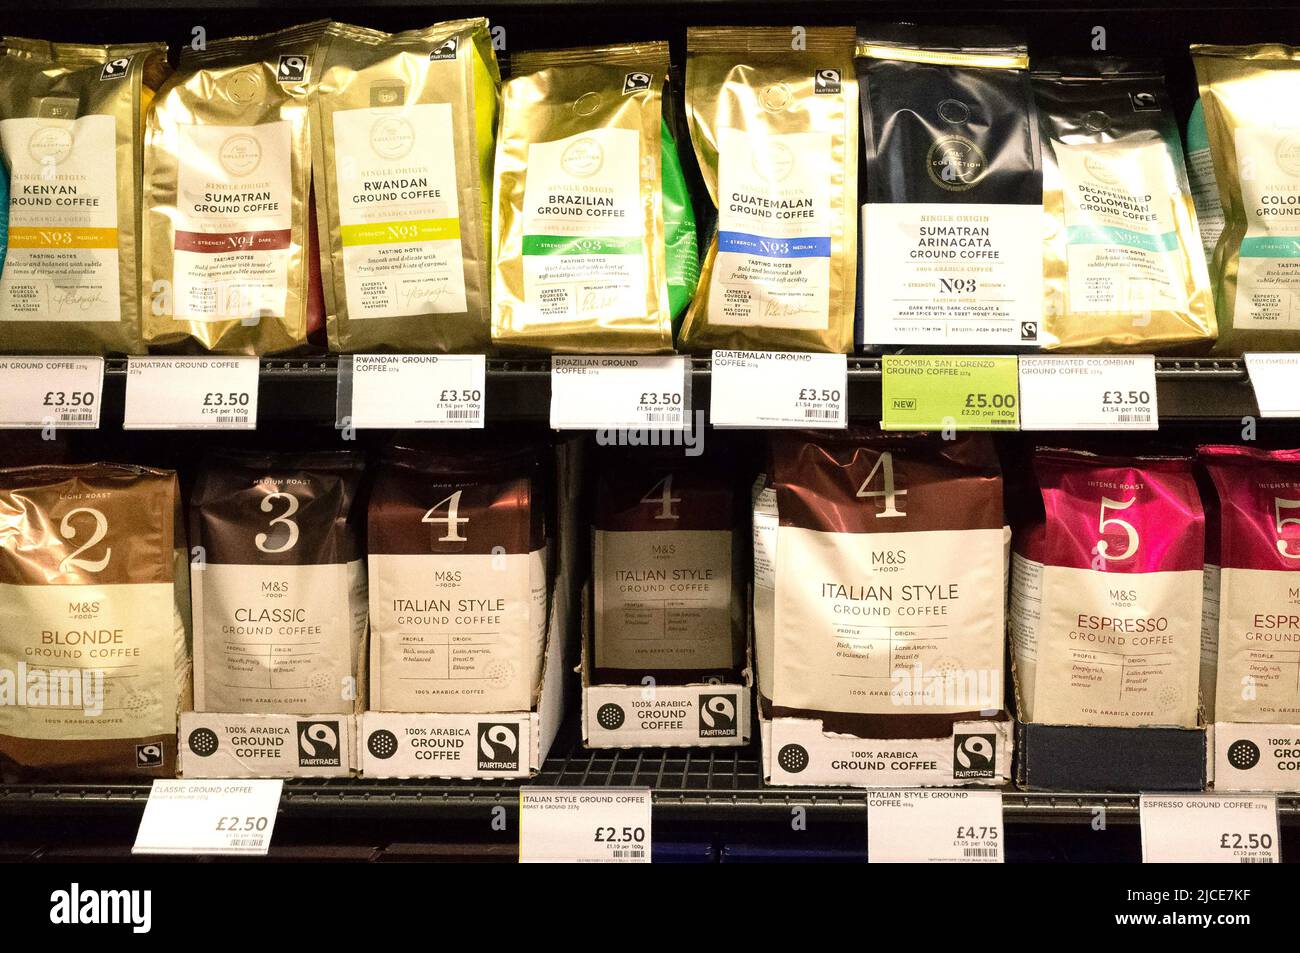 M&S Supermarket display of packages of own brand coffee ground and beans from several countries of origin Stock Photo